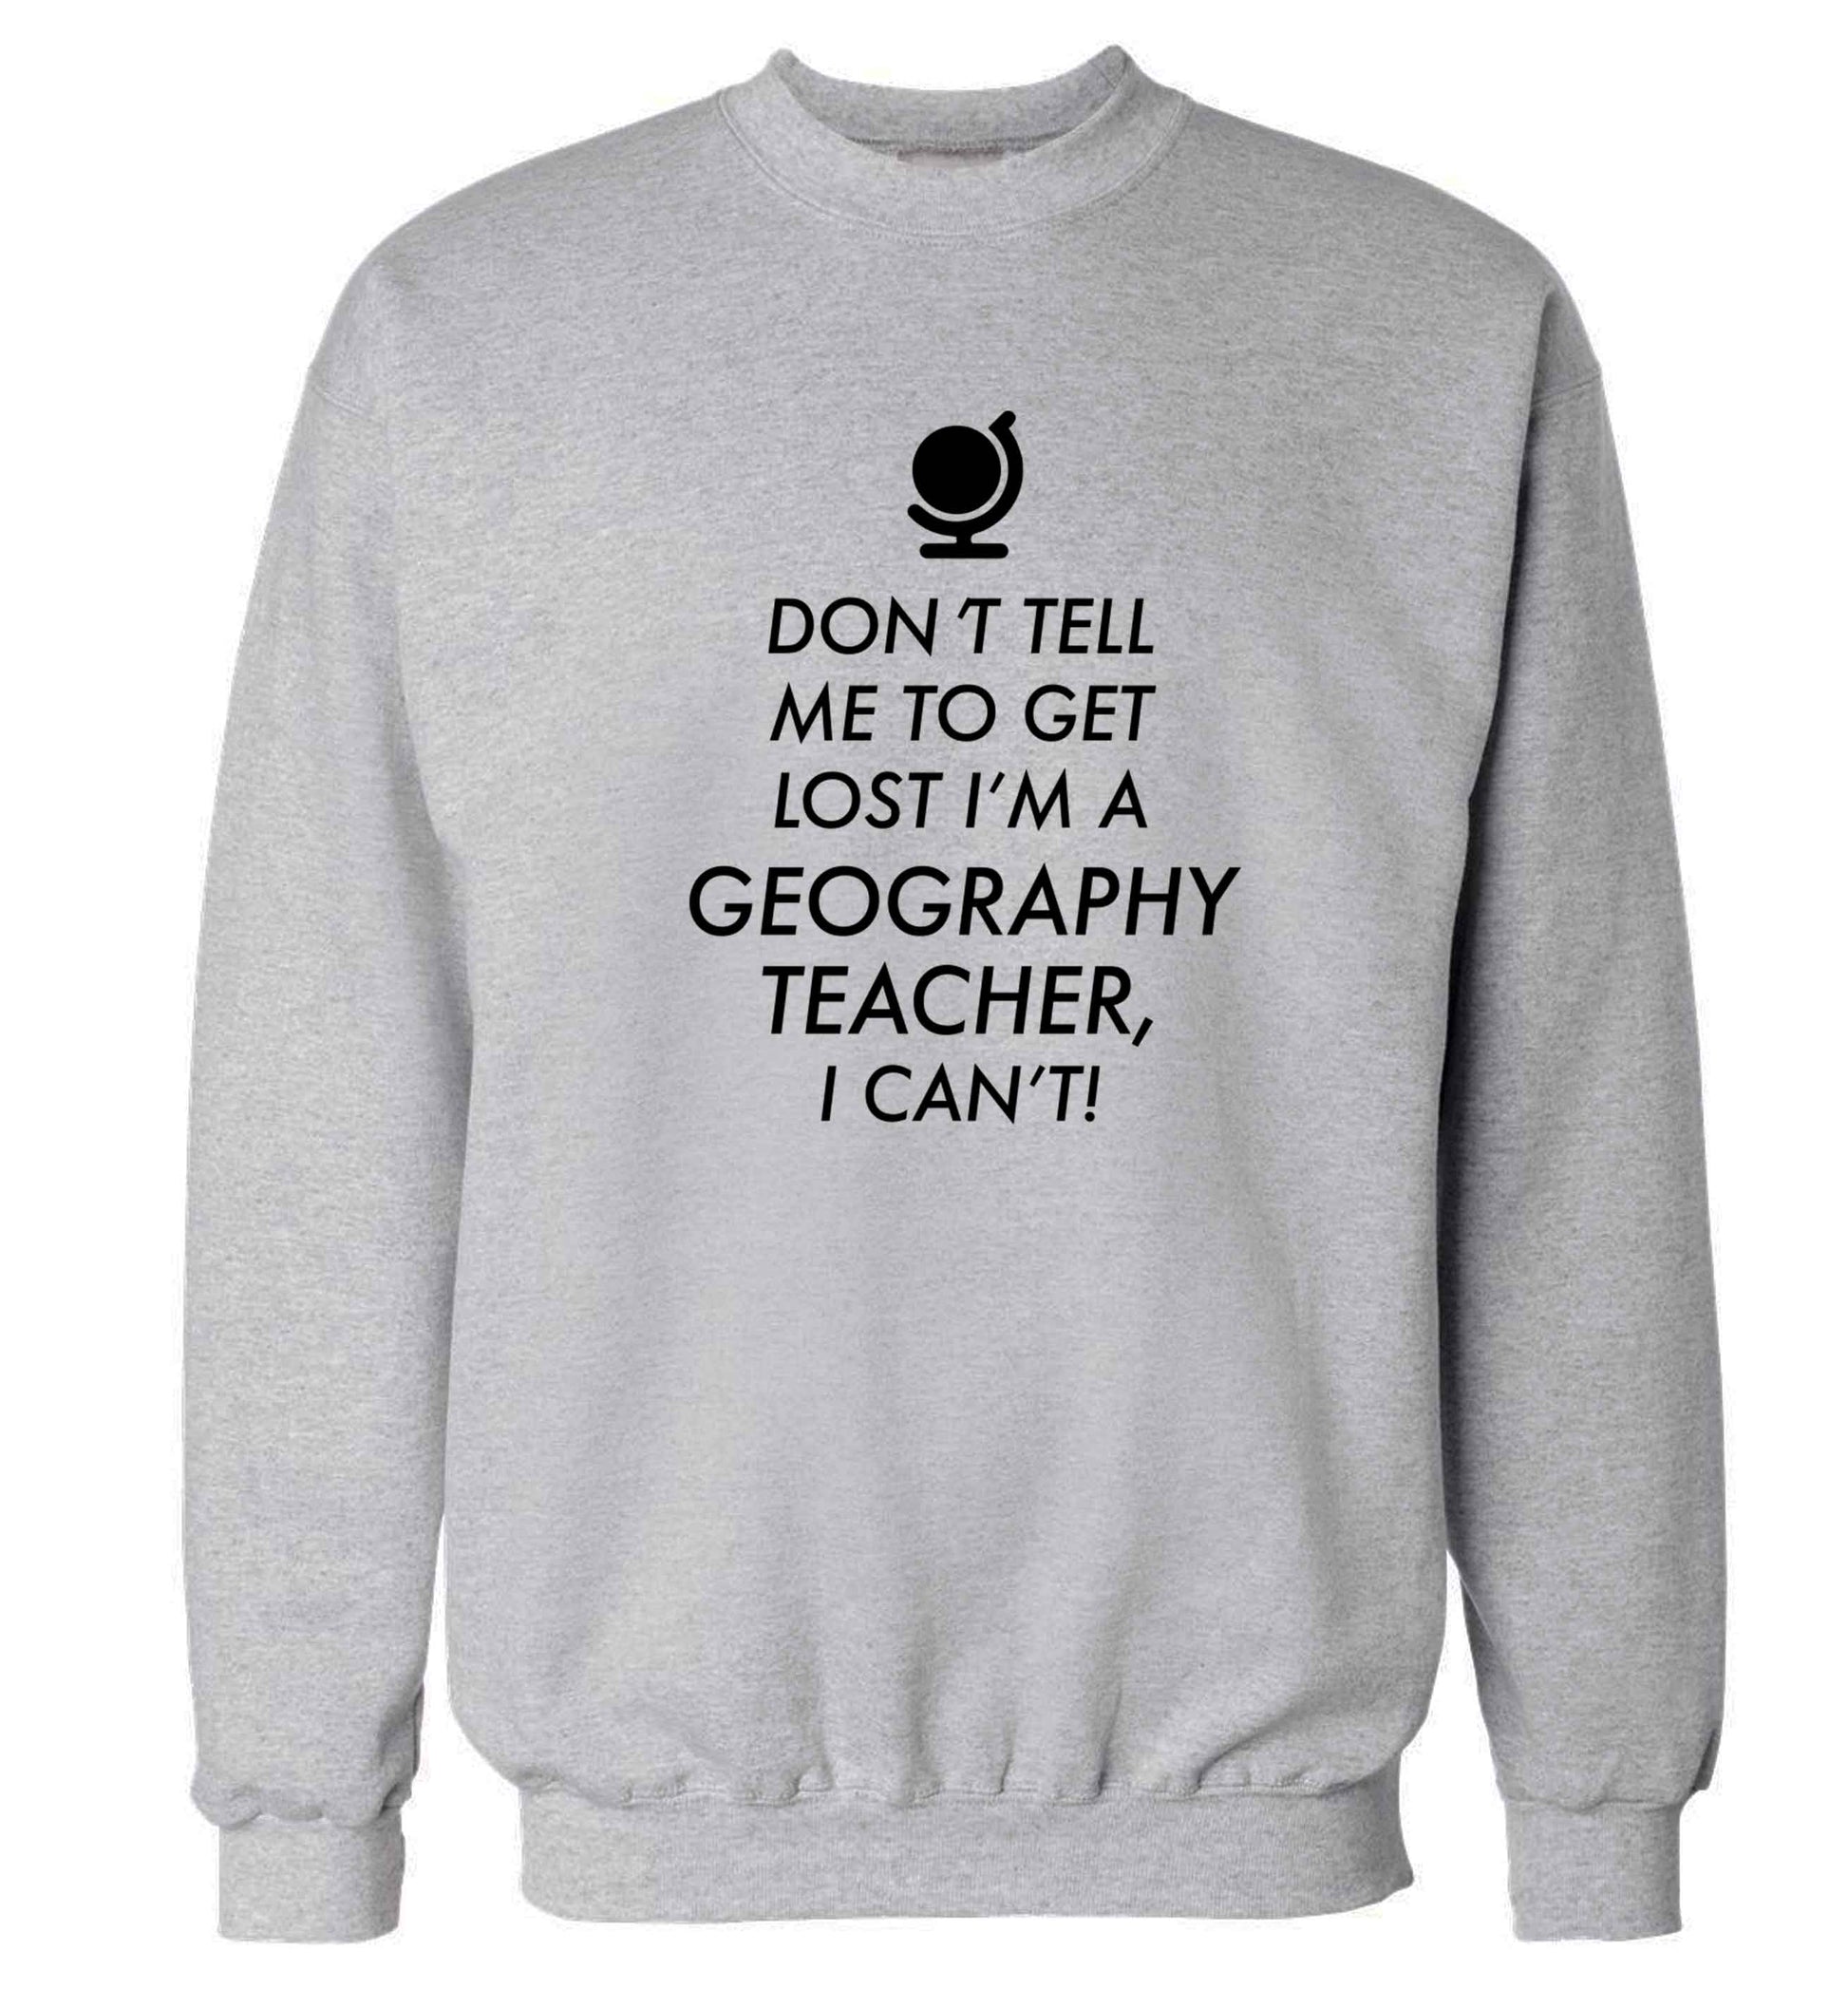 Don't tell me to get lost I'm a geography teacher, I can't Adult's unisex grey Sweater 2XL